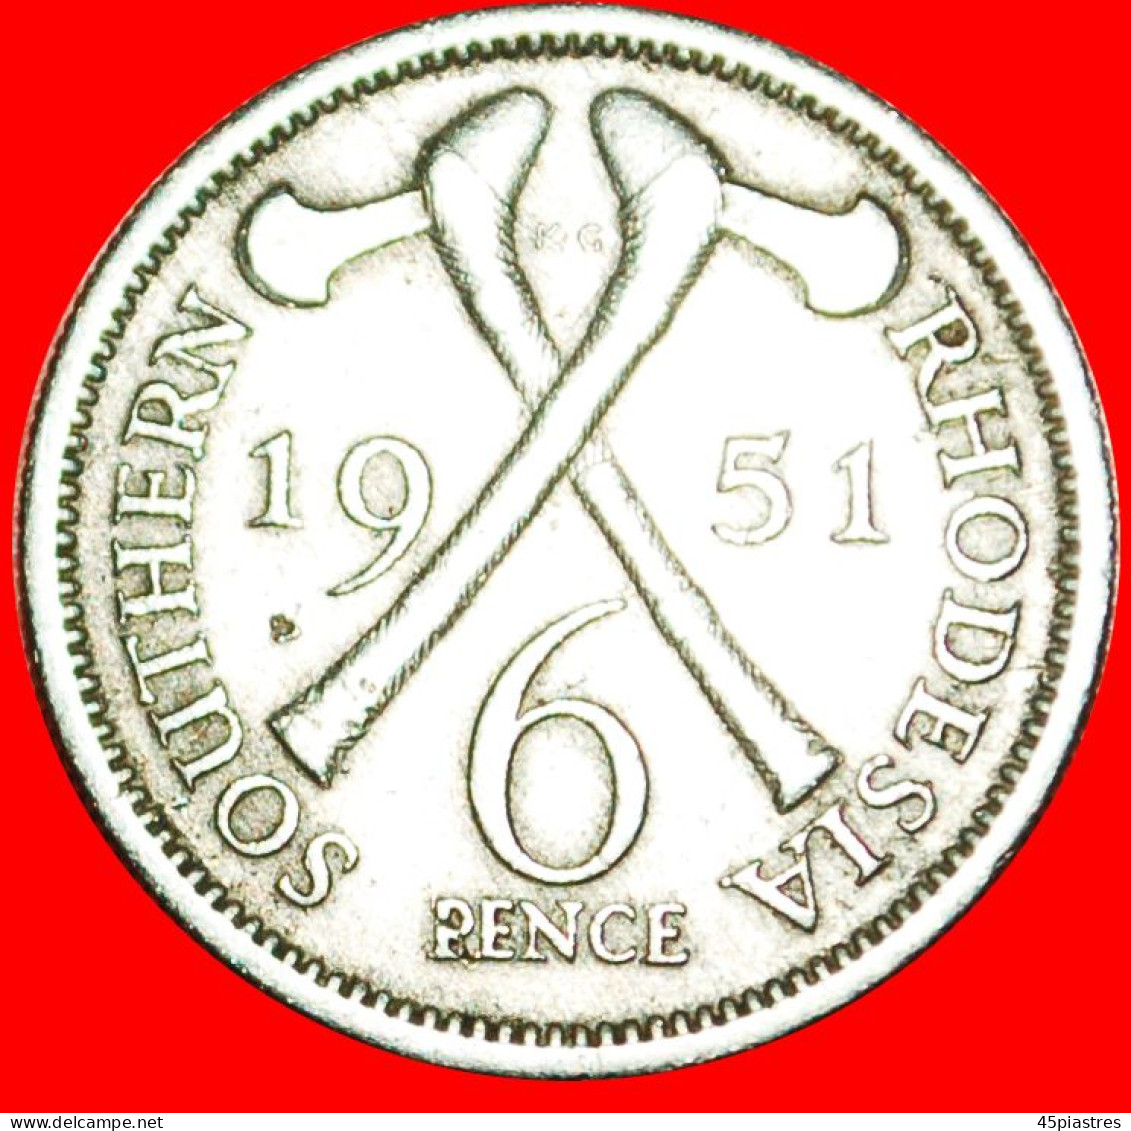 &#9733;2 AXES: SOUTHERN RHODESIA &#9733; 6 PENCE 1951! LOW START&#9733;NO RESERVE! George VI (1937-1952) - Rhodesië